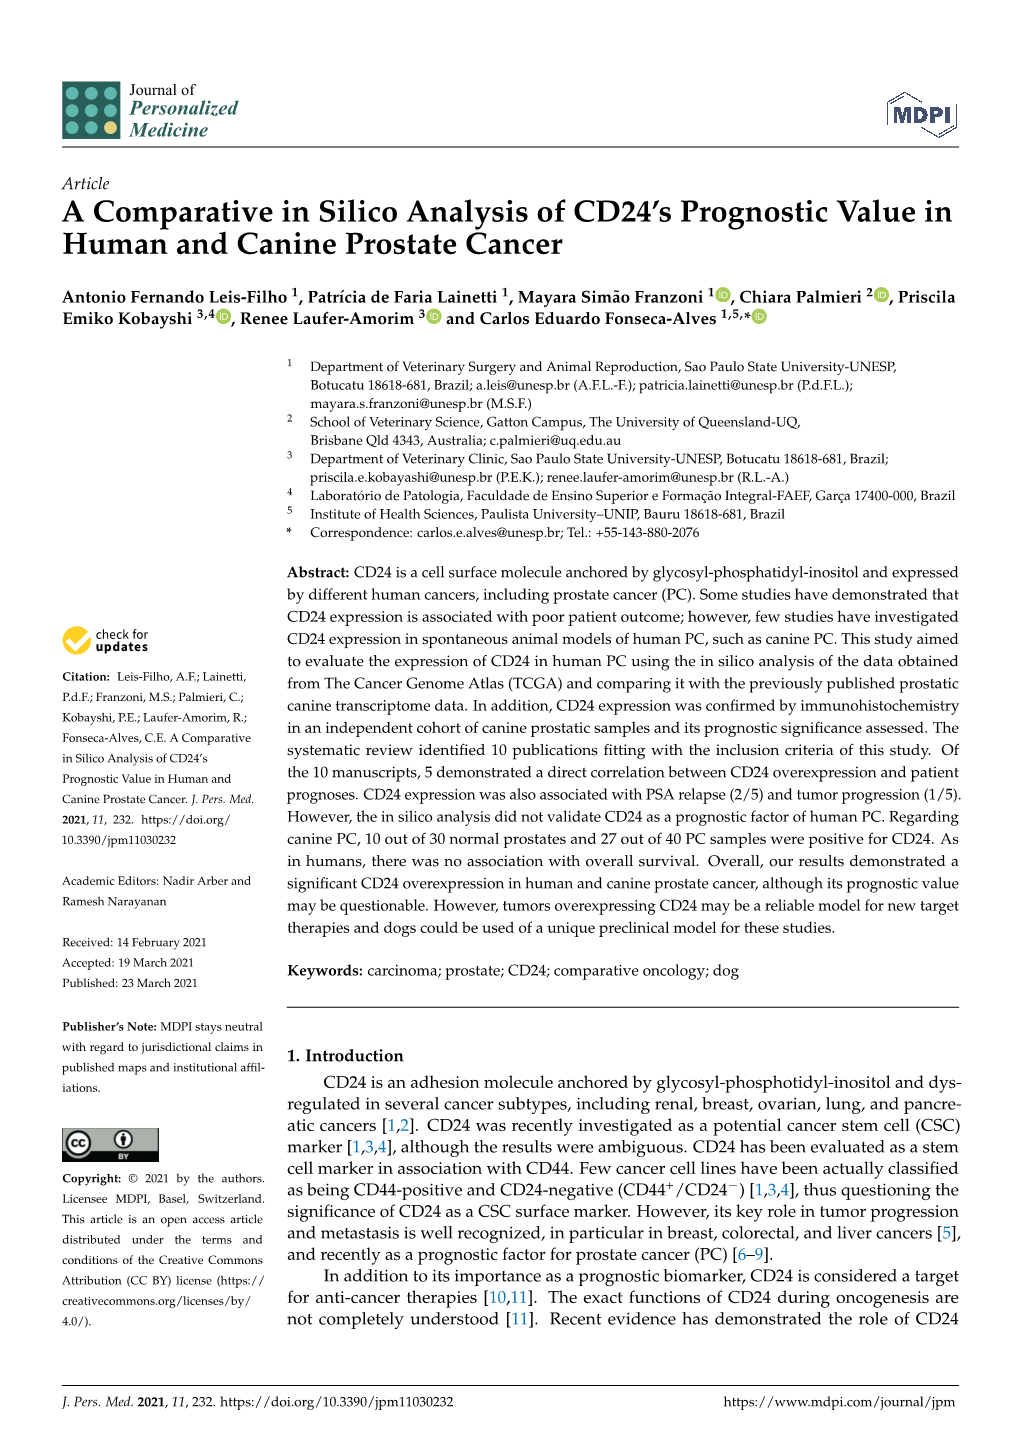 A Comparative in Silico Analysis of CD24's Prognostic Value in Human